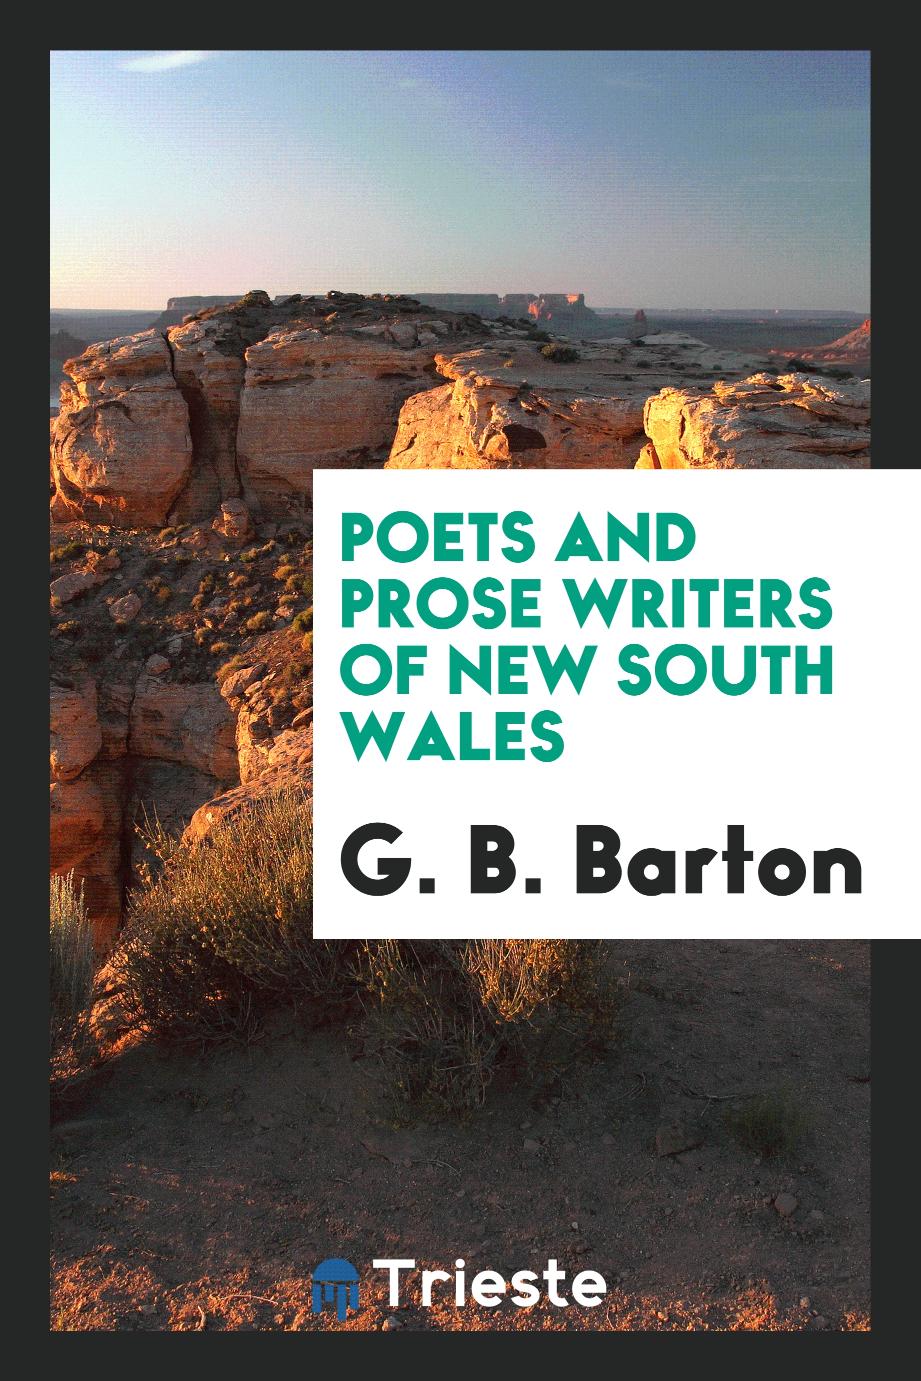 Poets and prose writers of New South Wales